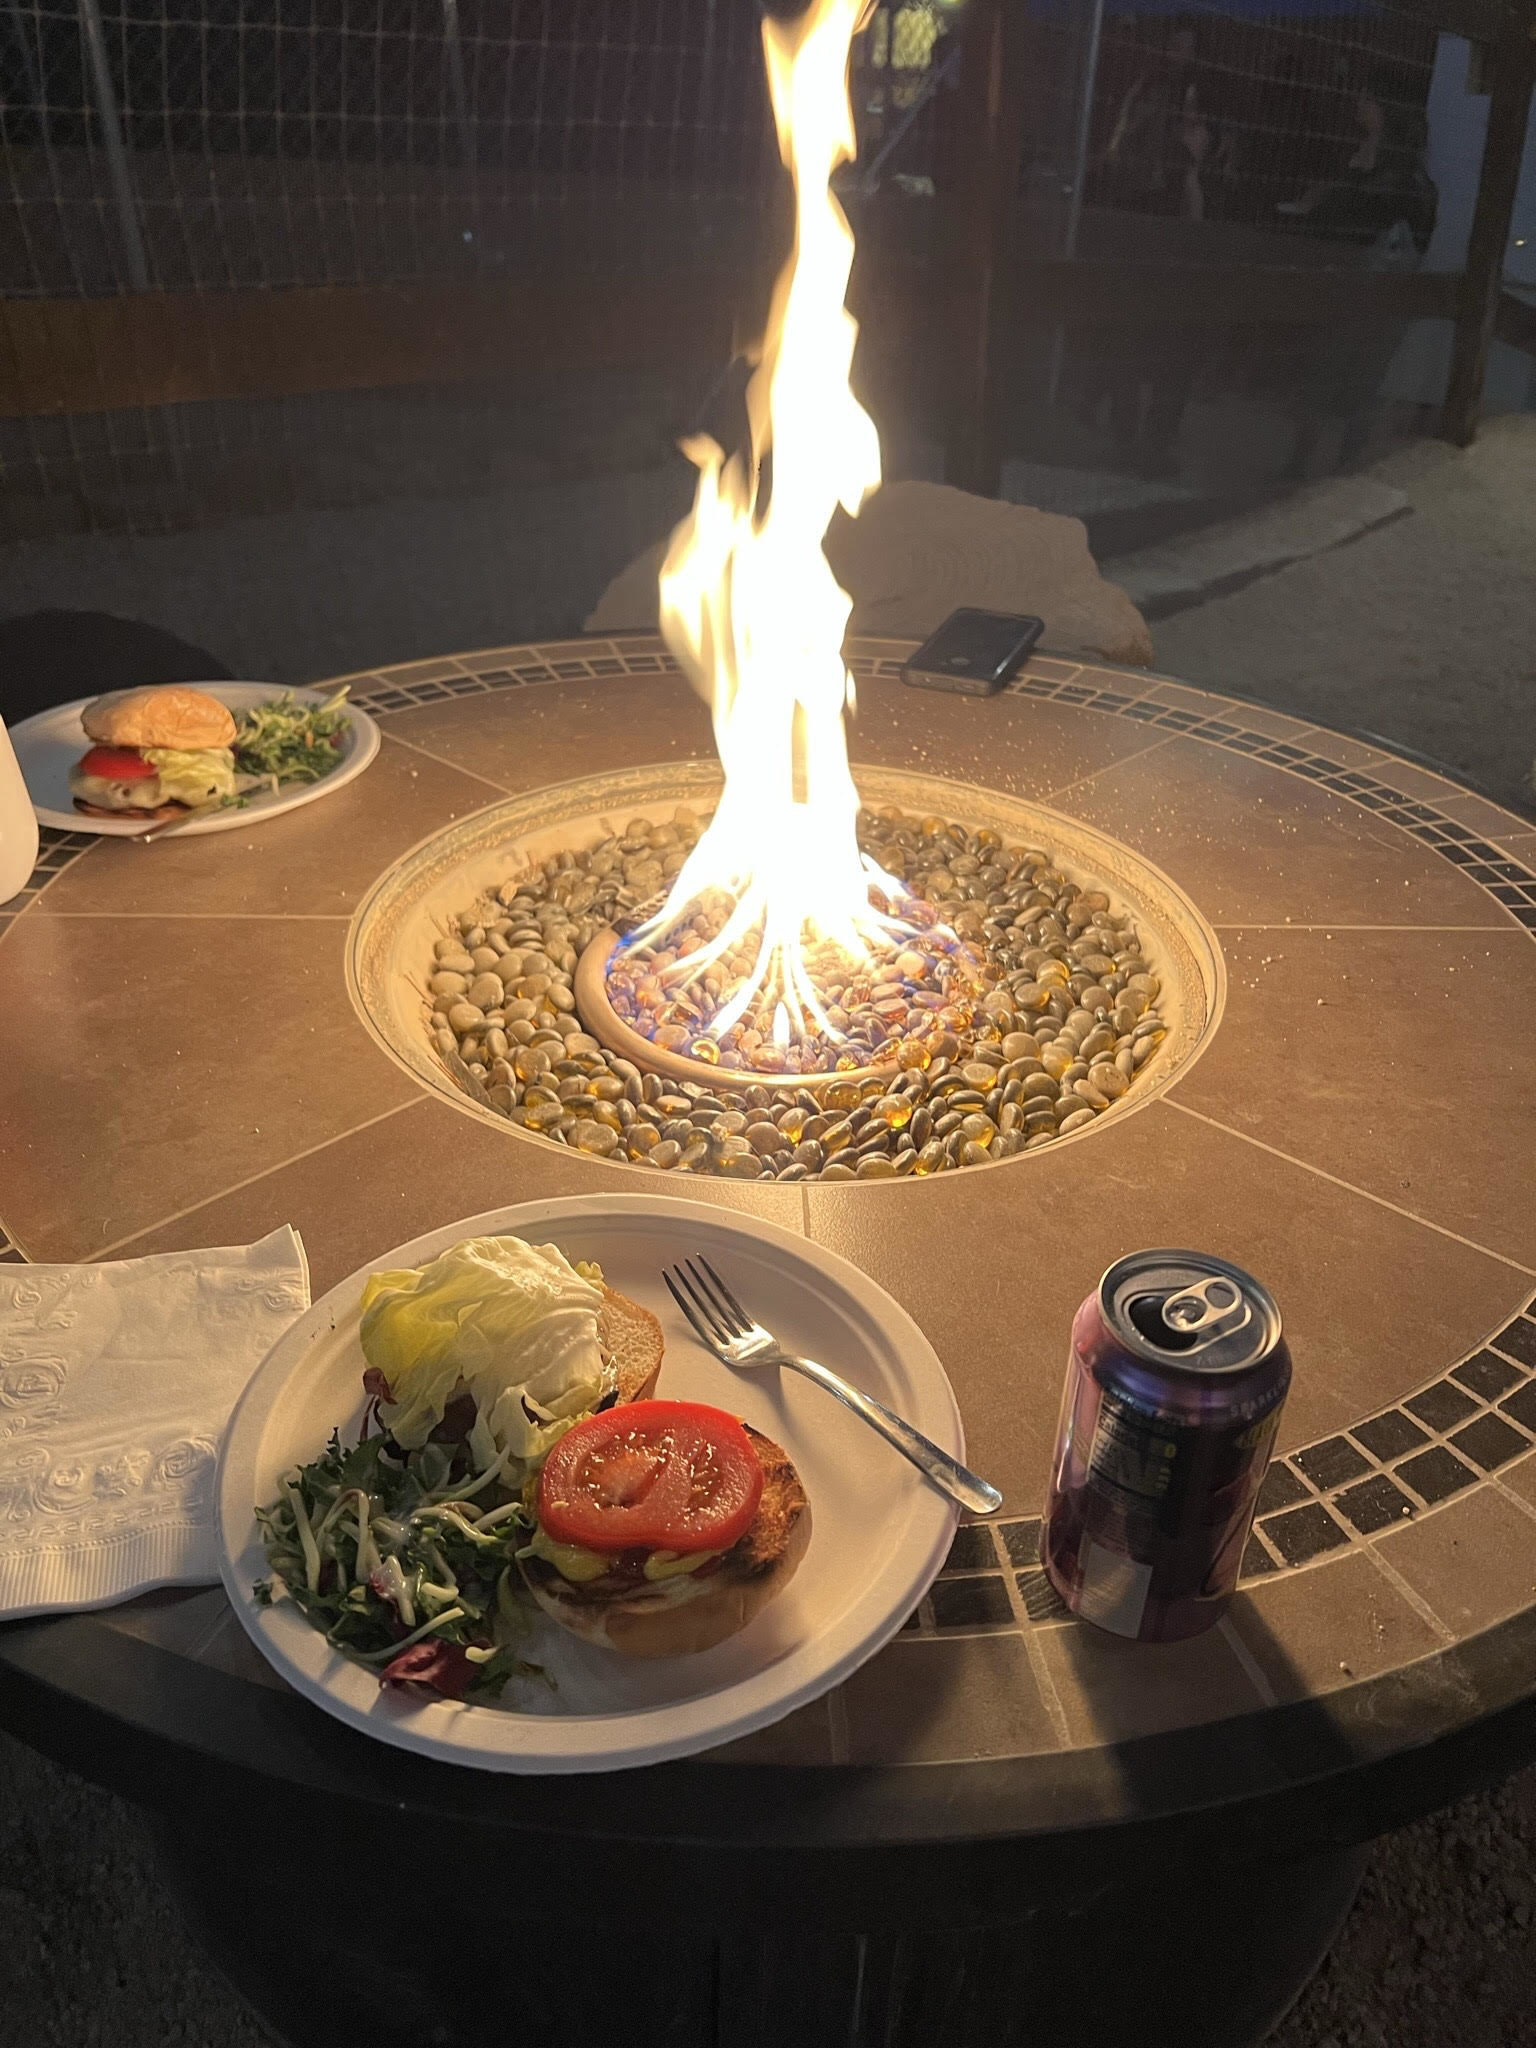 A fire in the center of a table outdoors and plates of food and beverages